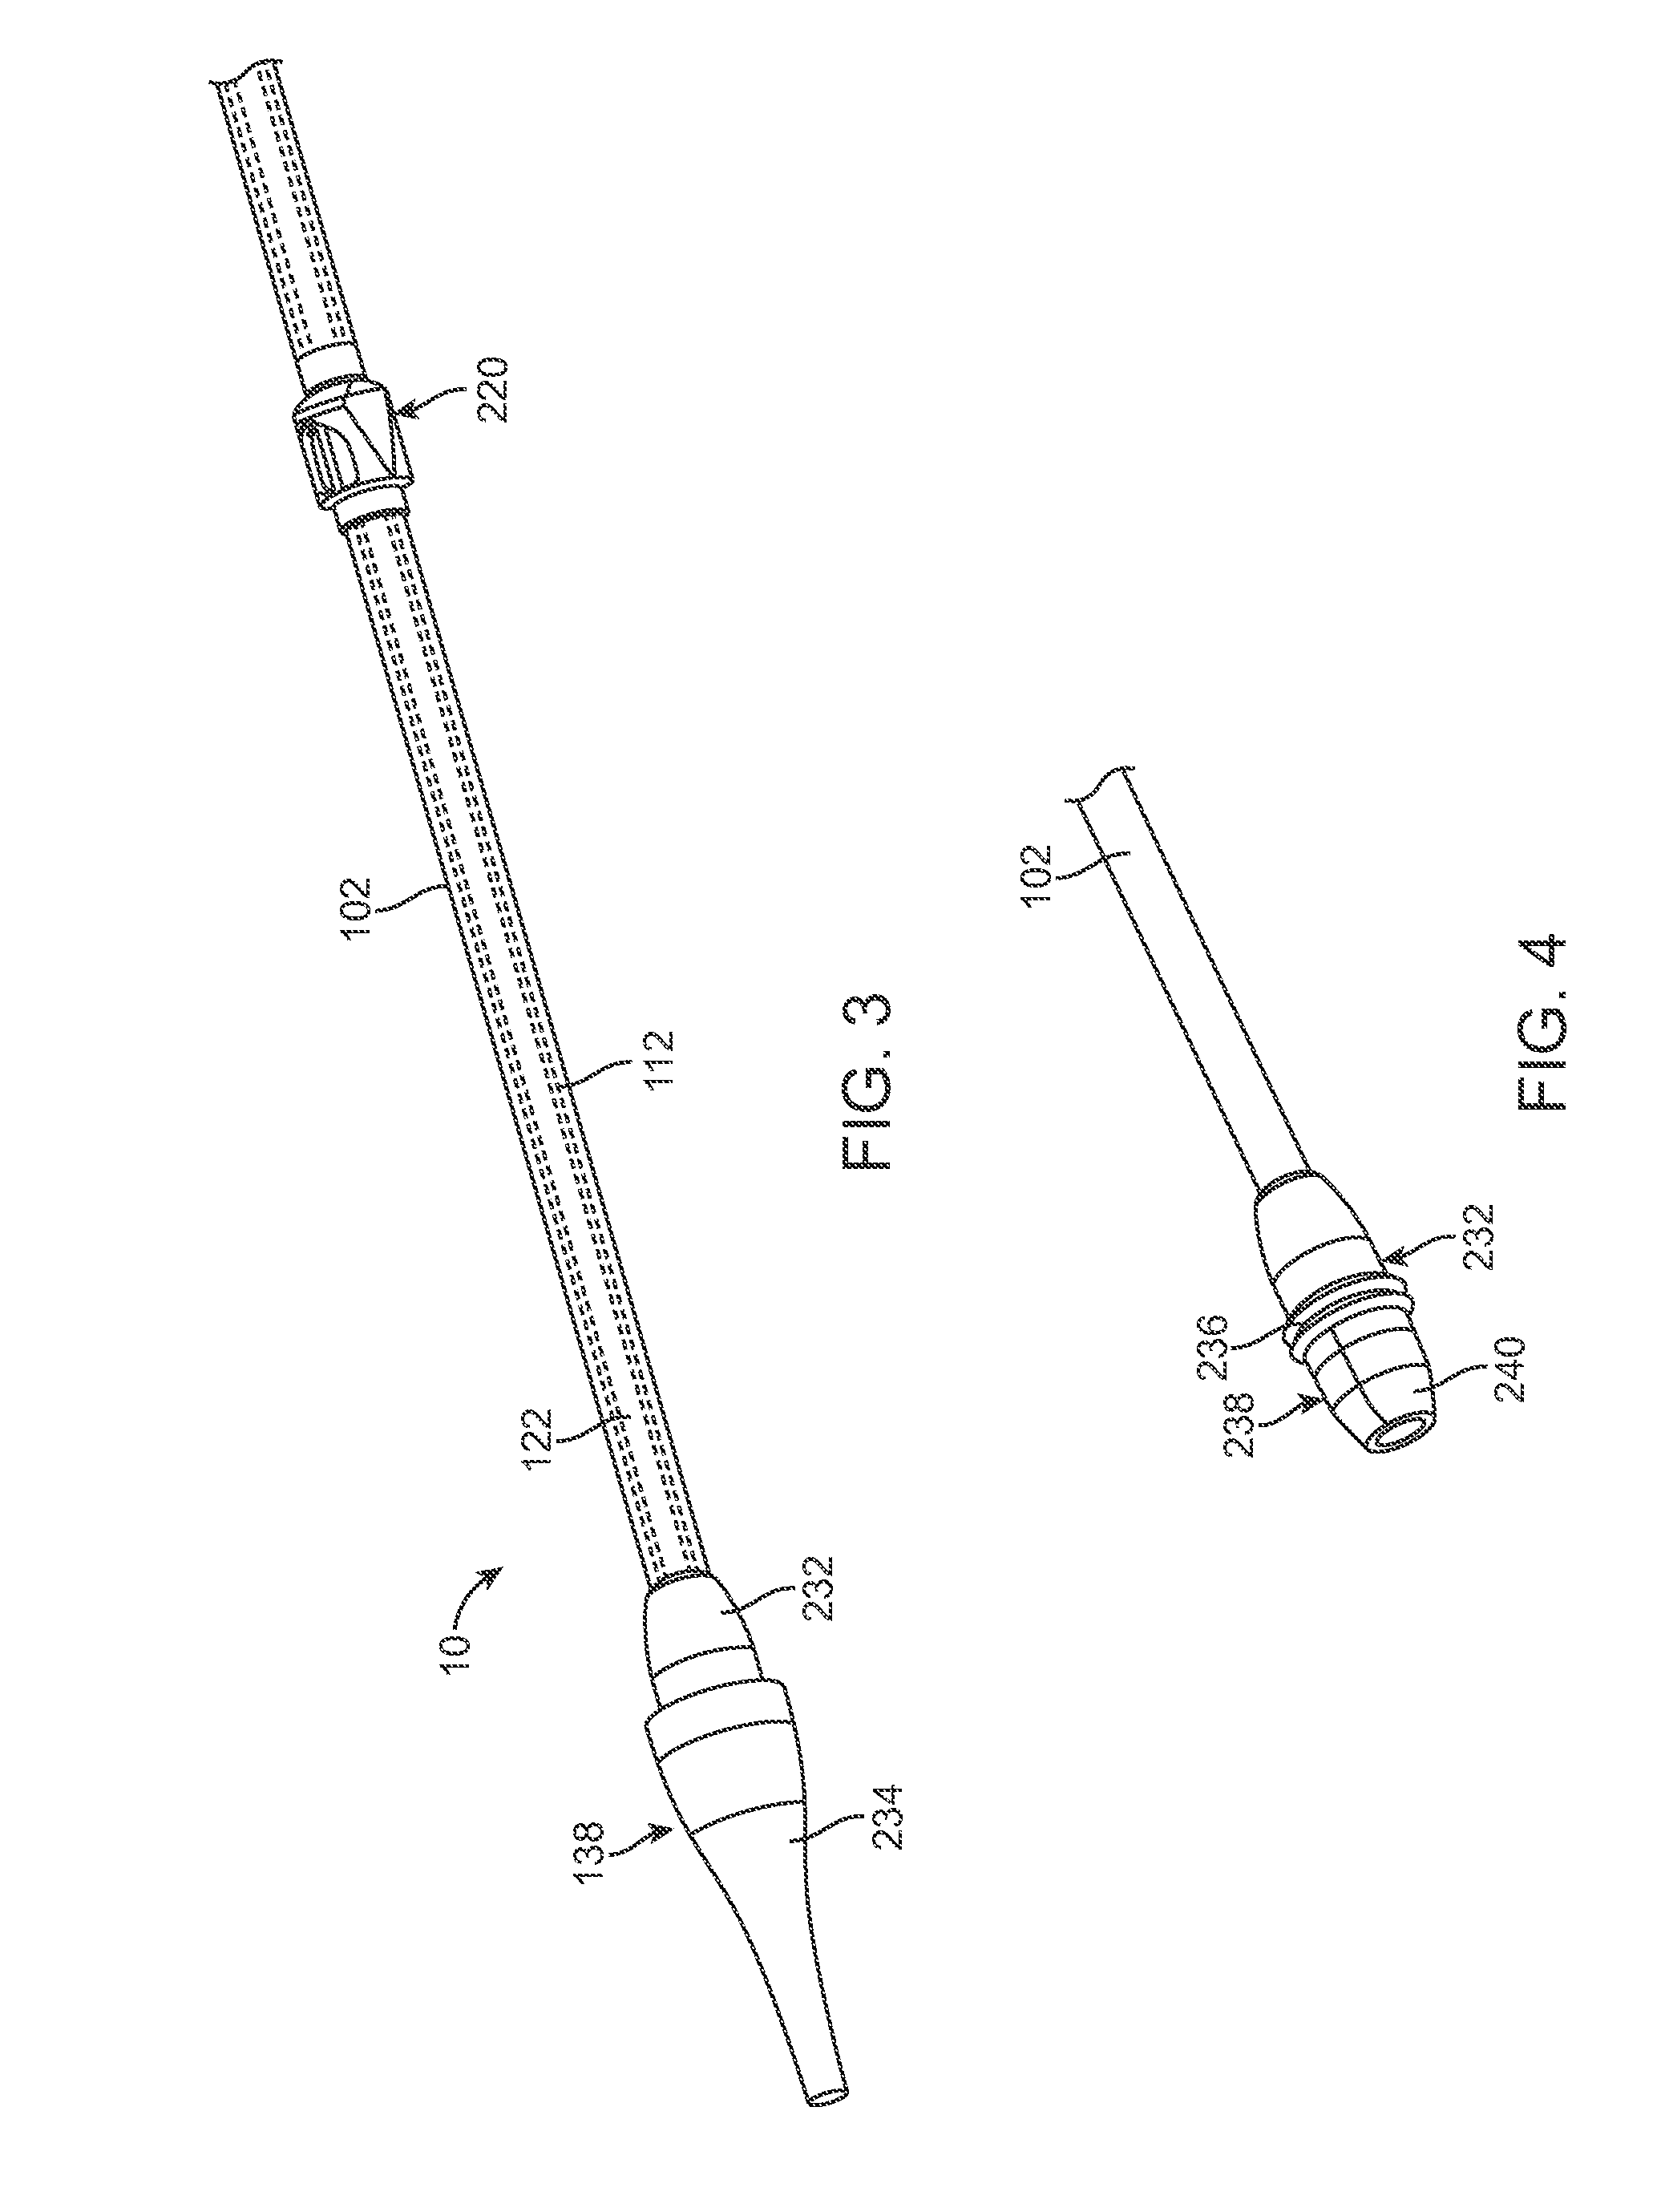 Balloon valvuloplasty delivery system